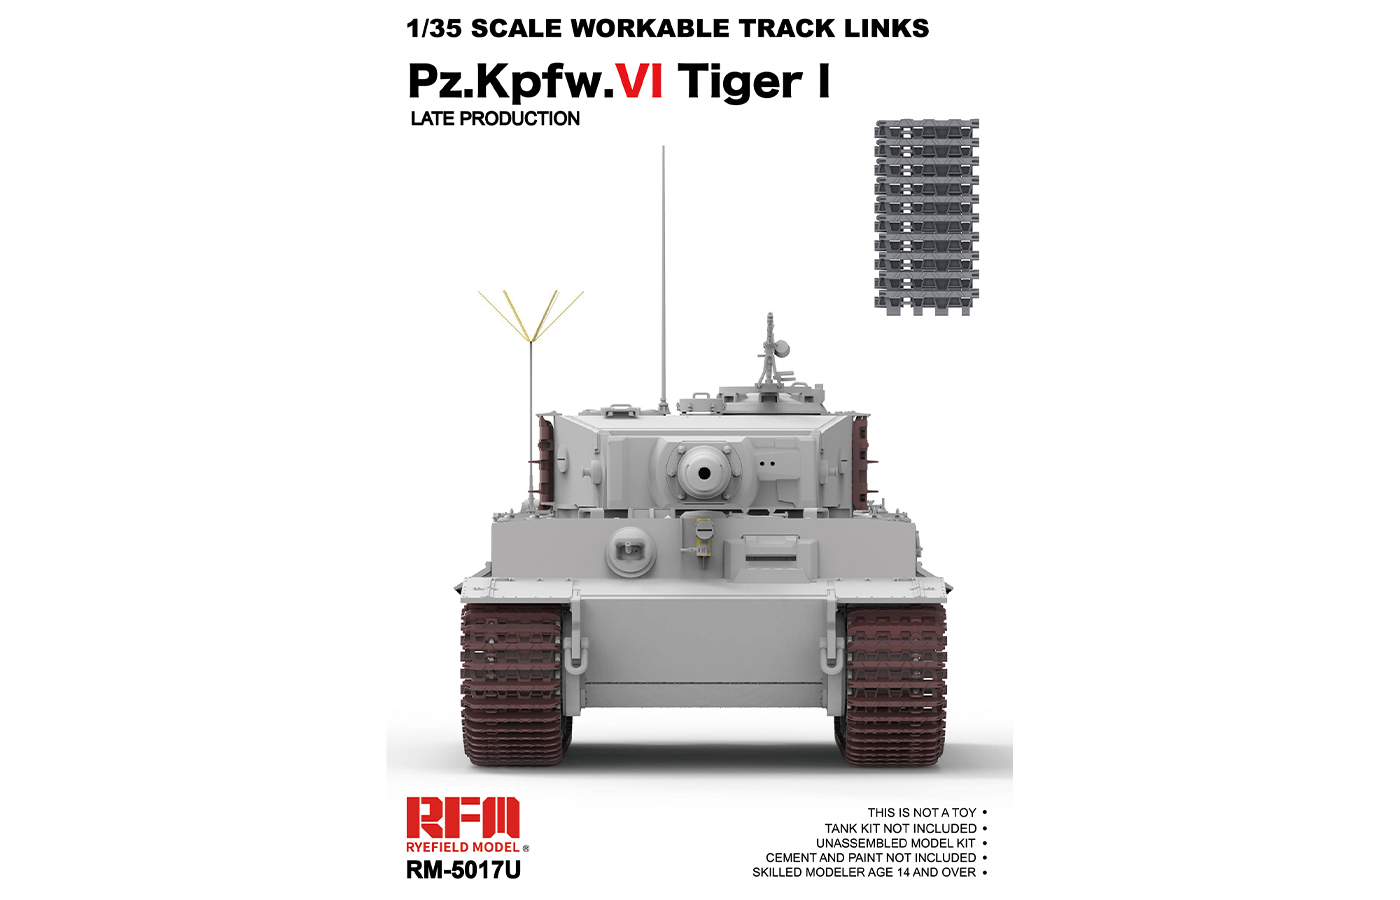 Workable Track Links for Tiger I Late Production